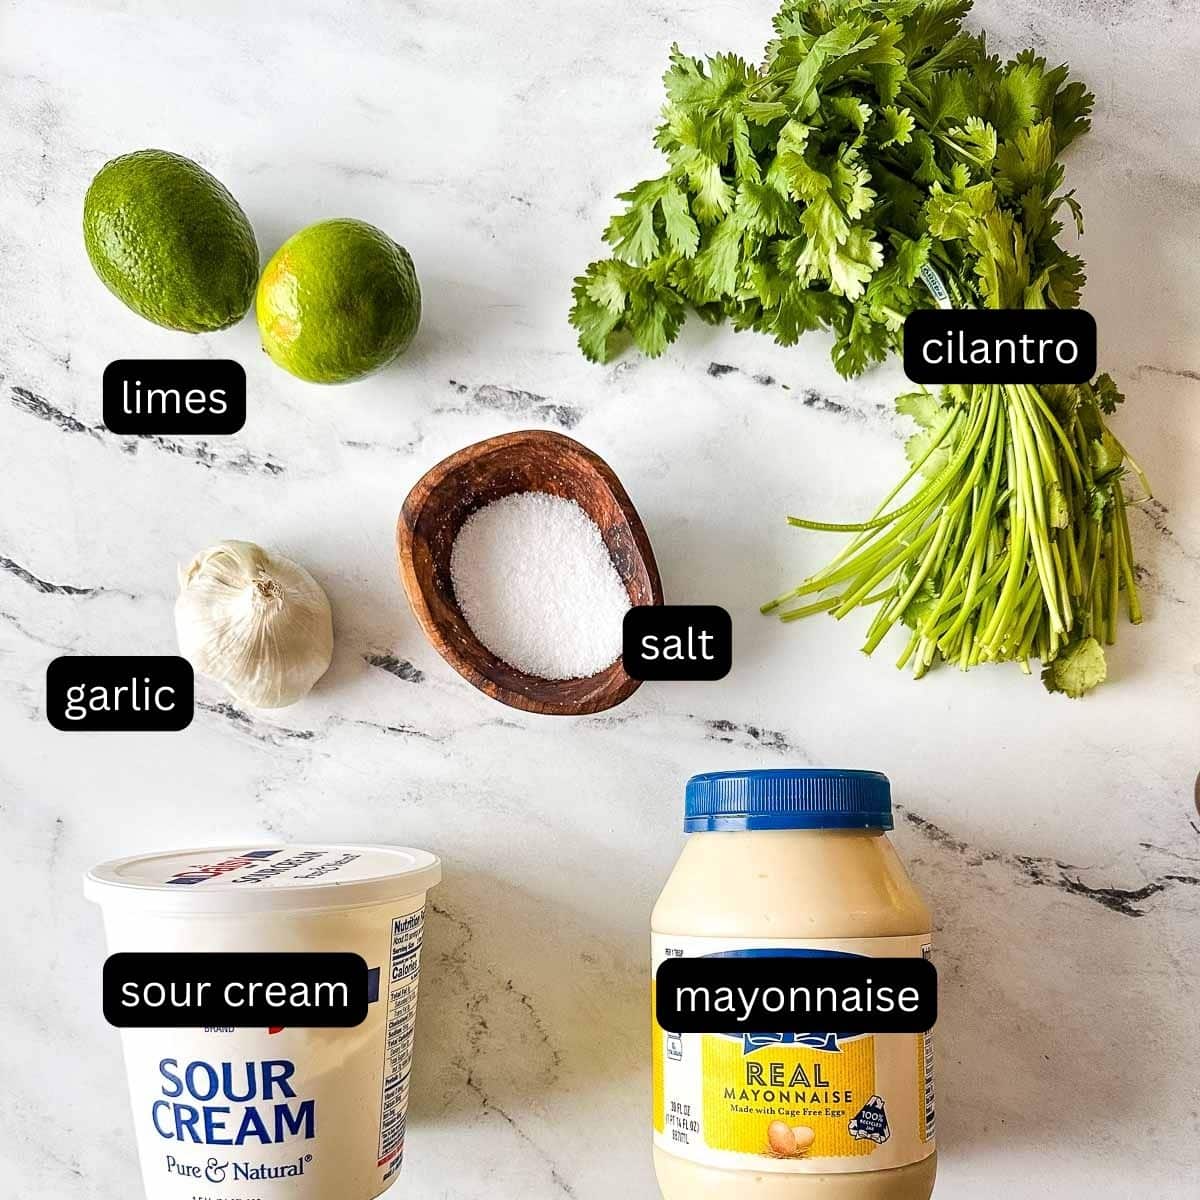 The labeled ingredients for cilantro lime crema sit on a white marble counter.